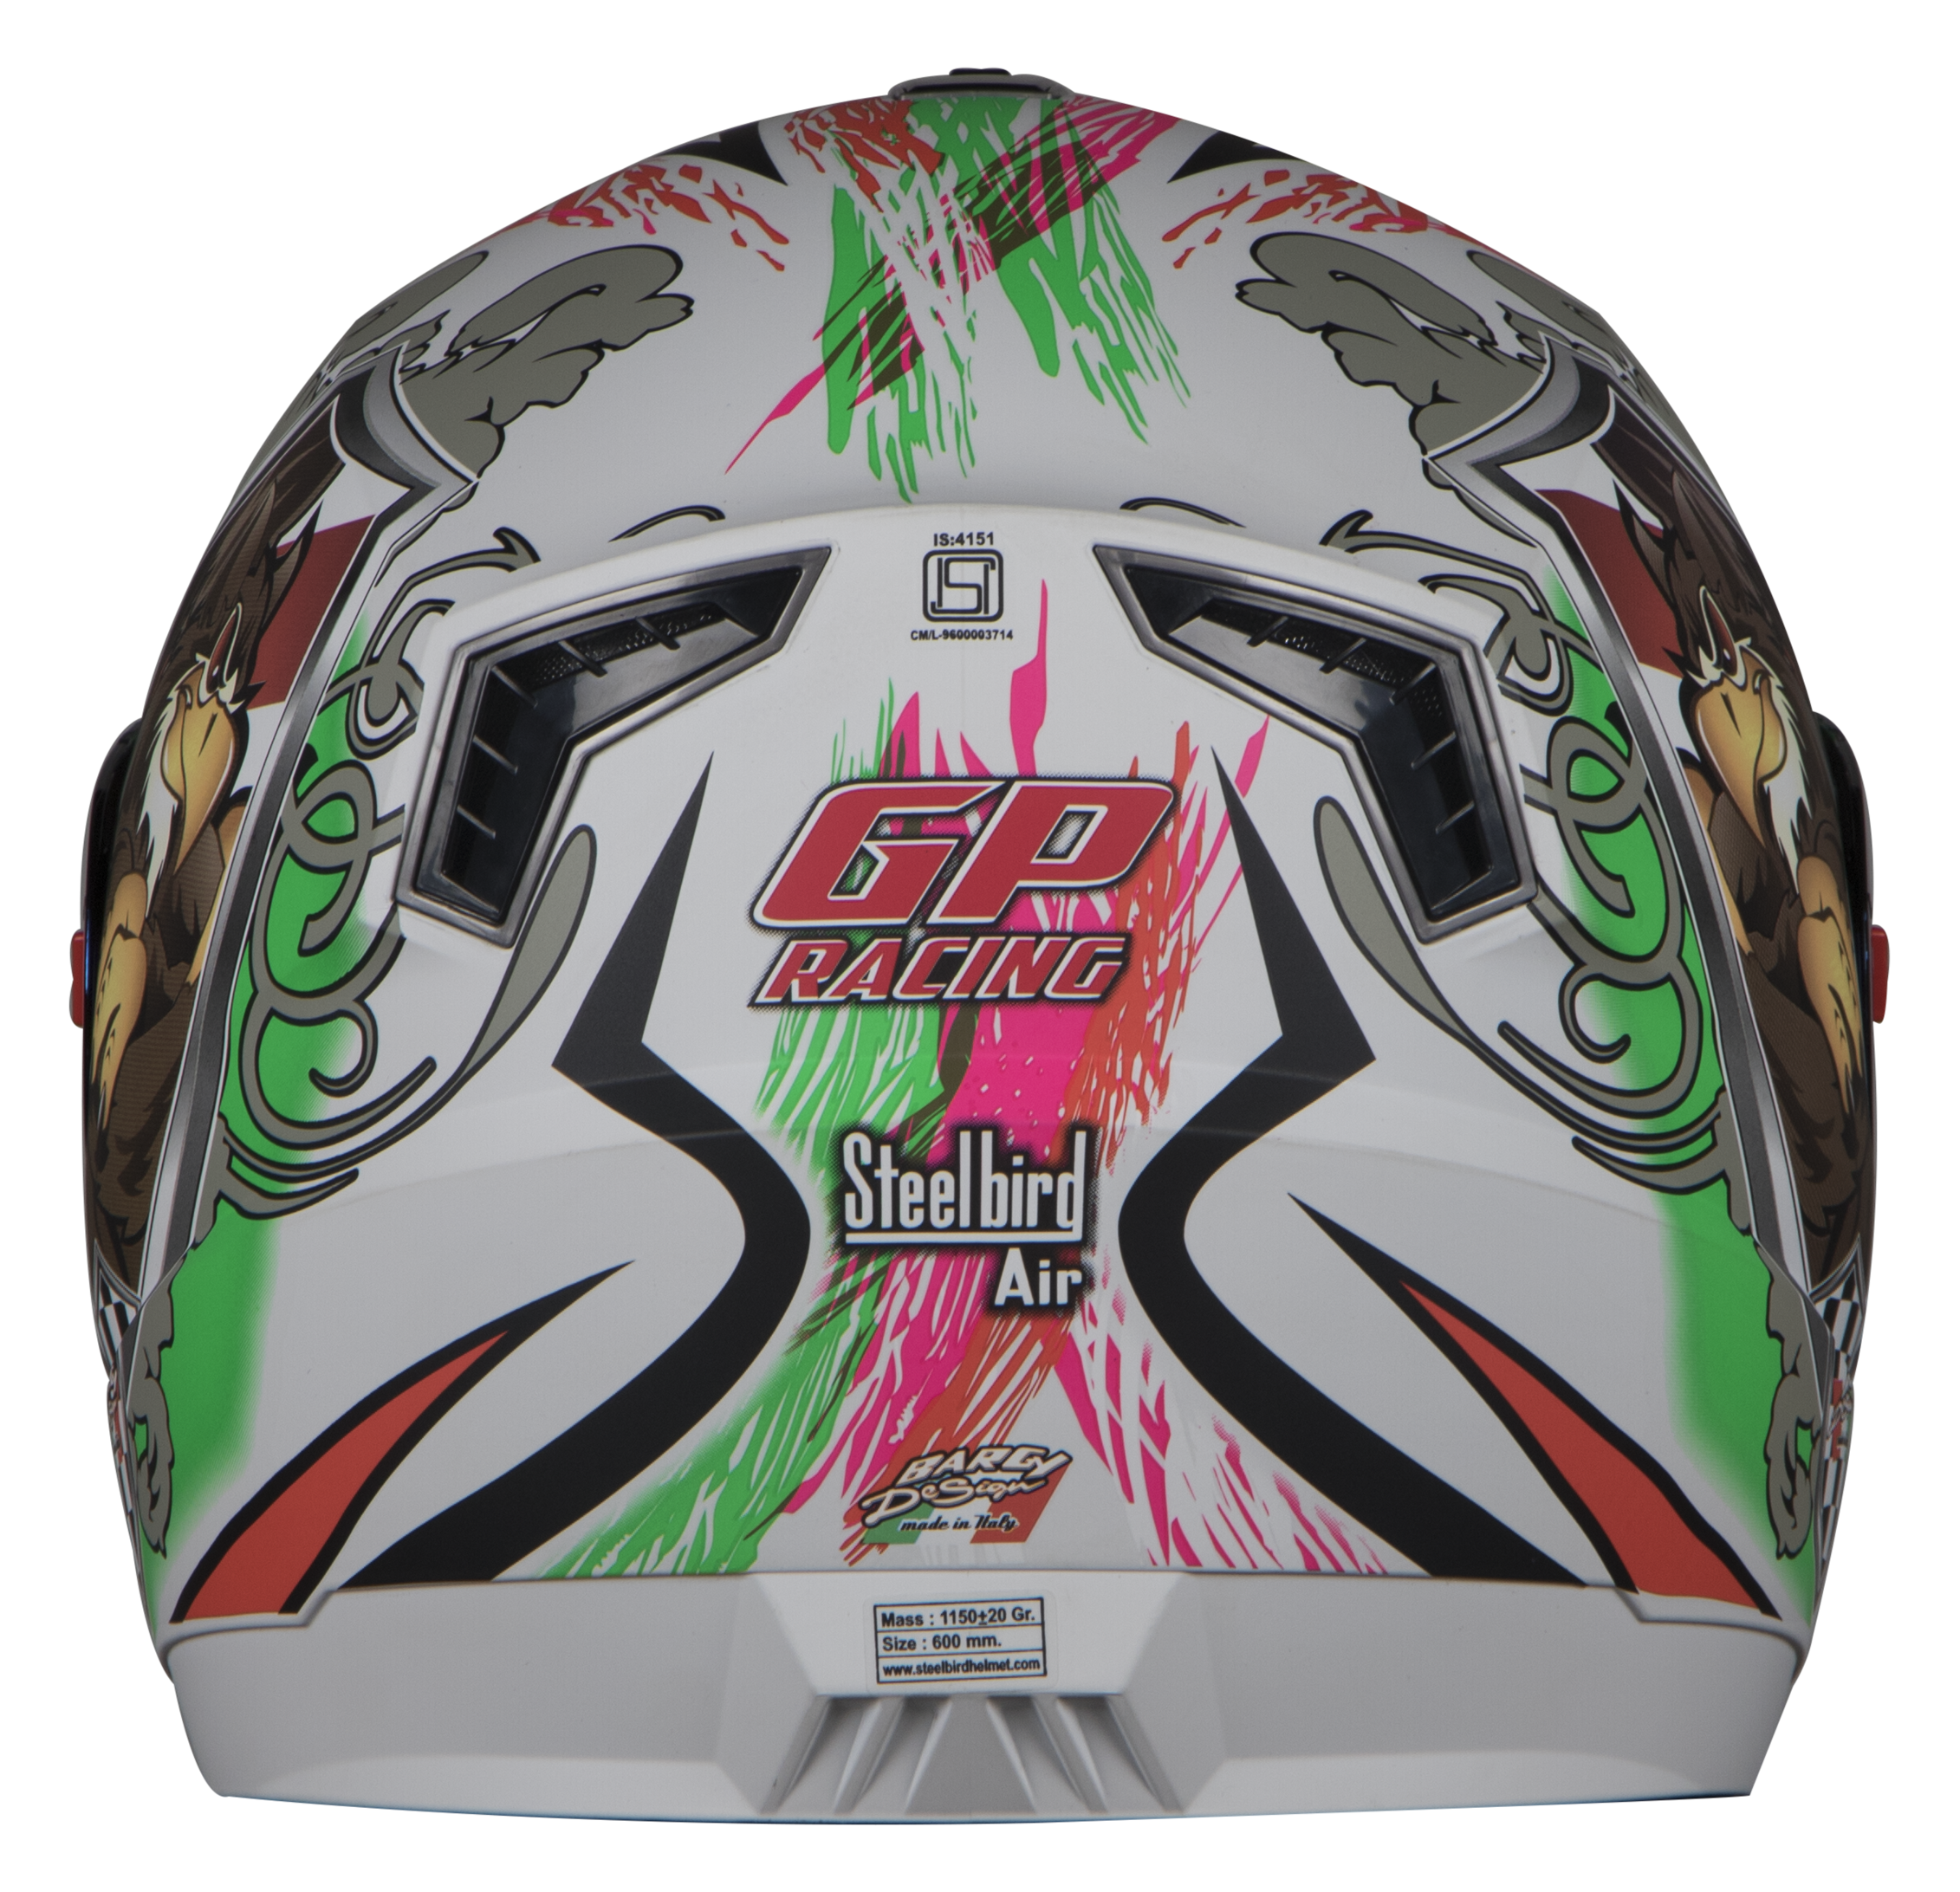 SBA-1 Griffon Glossy White With Green ( Fitted With Clear Visor Extra Blue Chrome Visor Free)